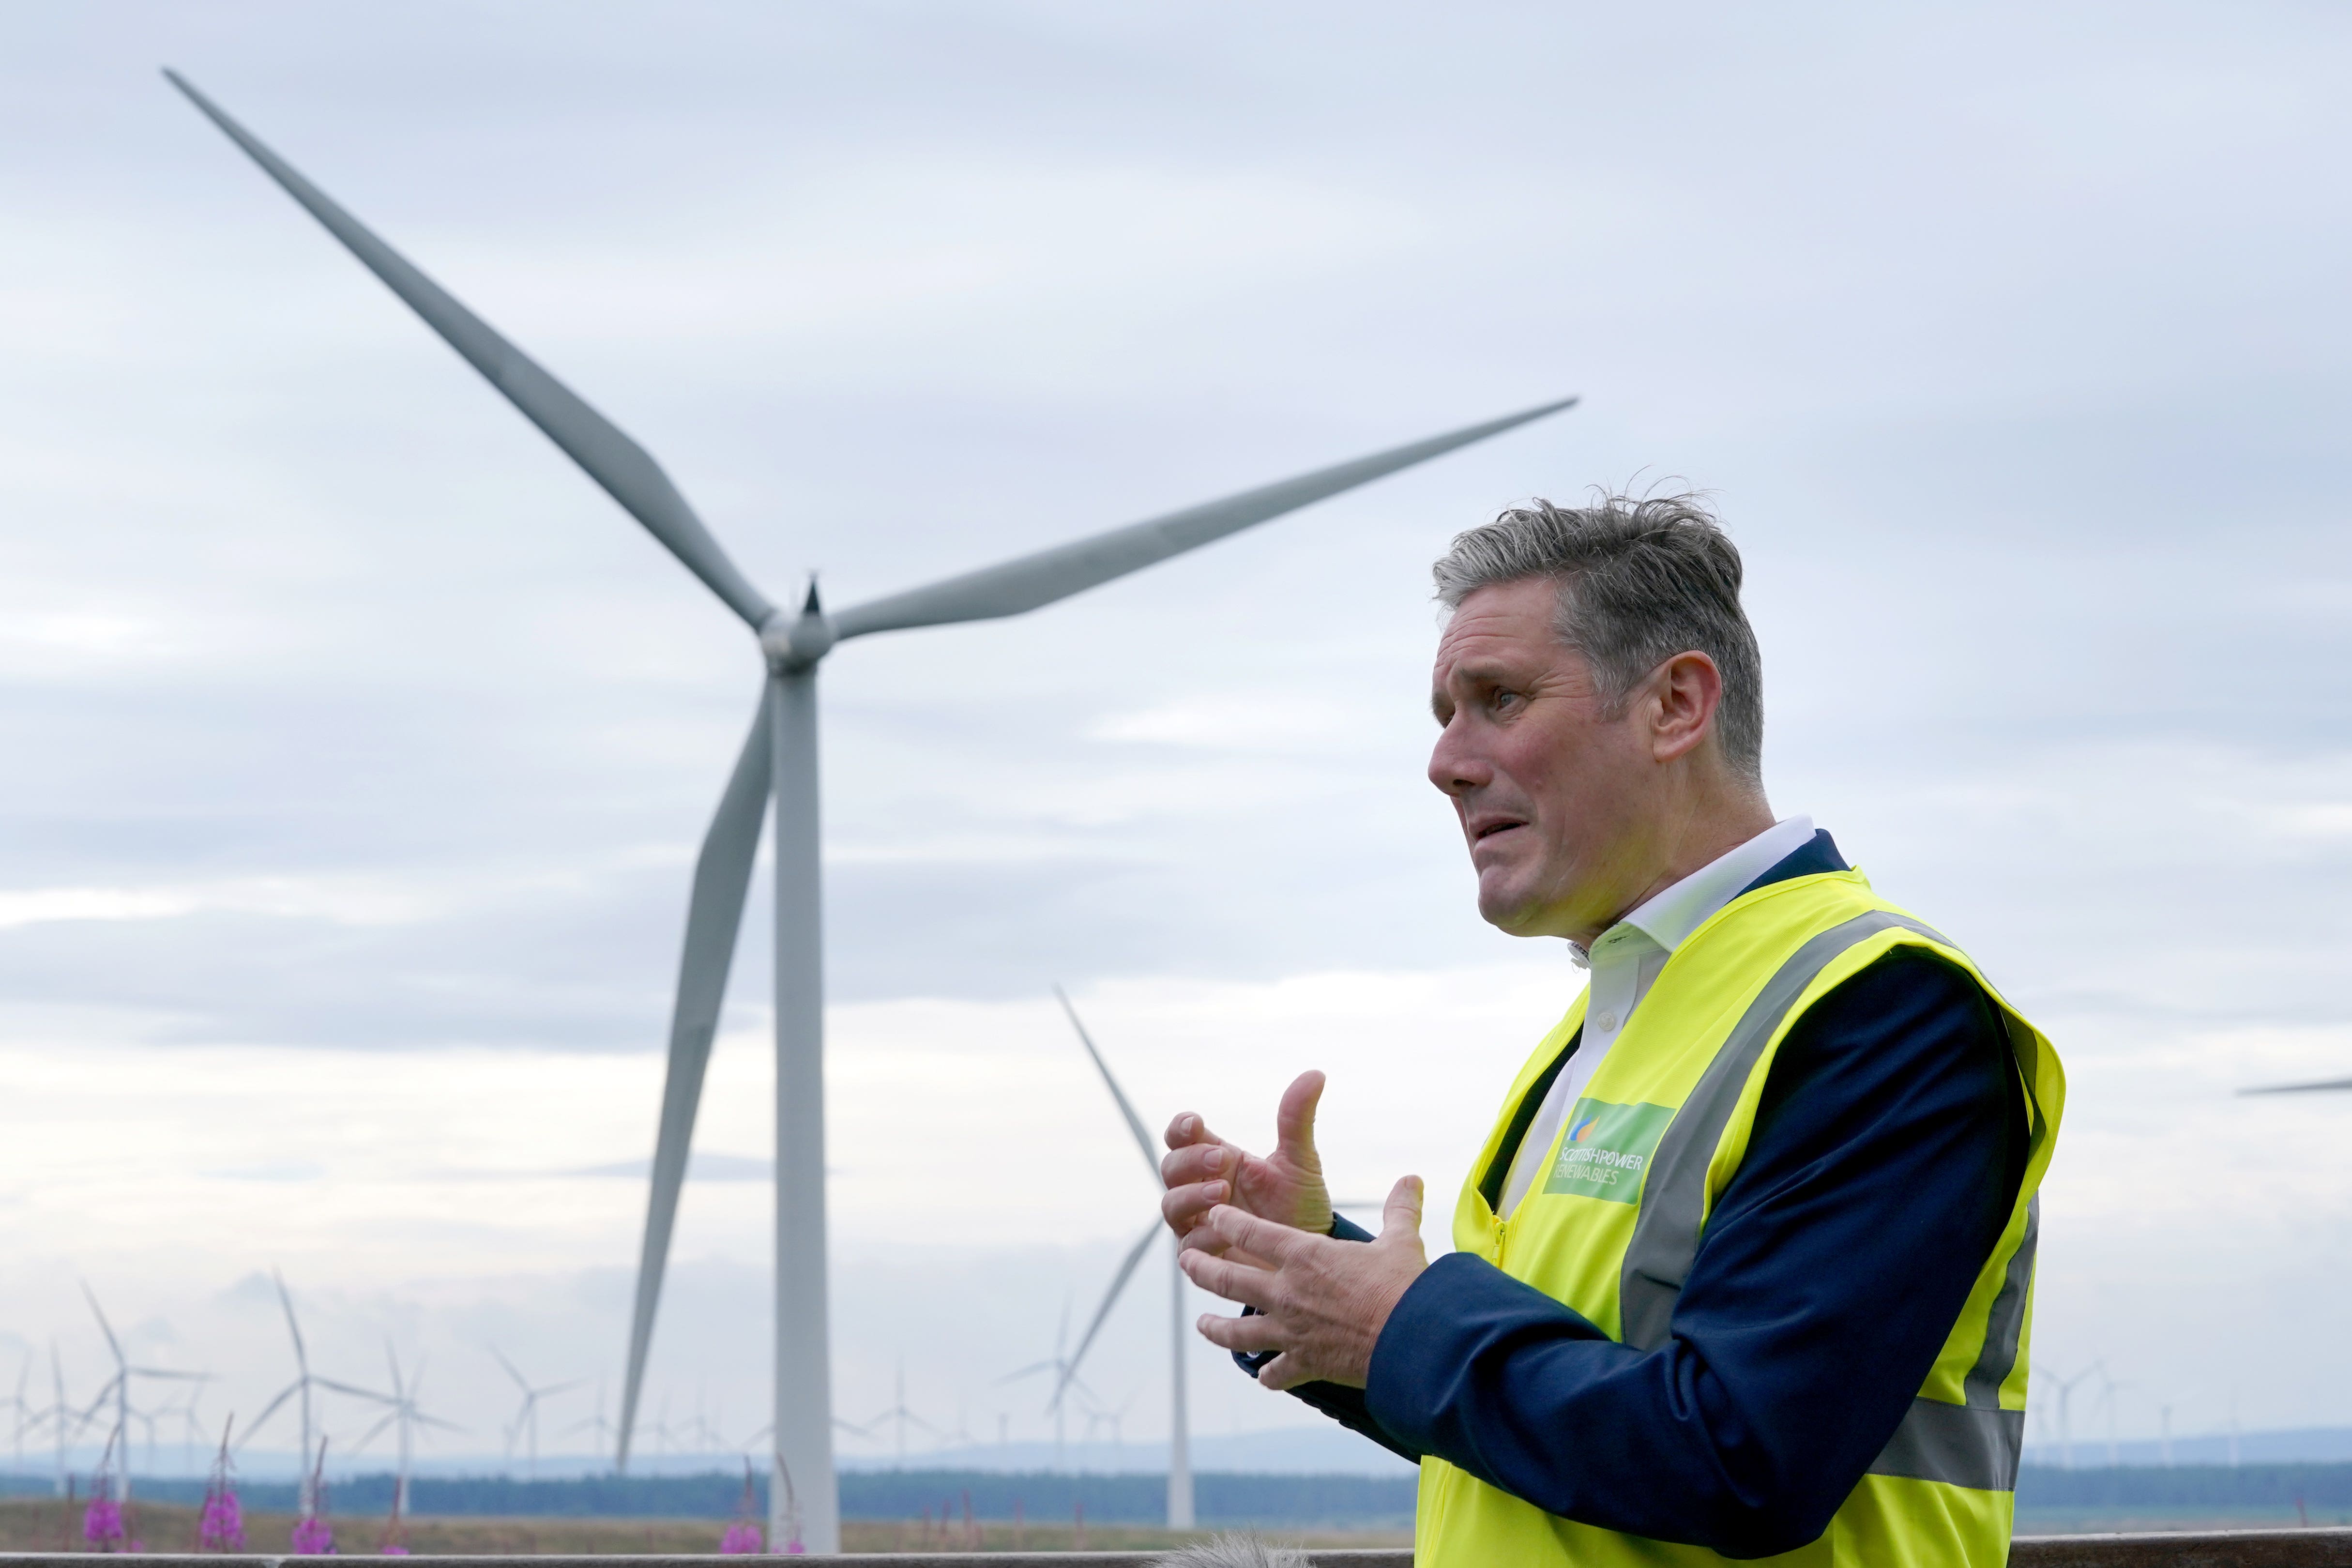 Labour leader Sir Keir Starmer pictured during a visit to Whitelees windfarm, Eaglesham (PA)